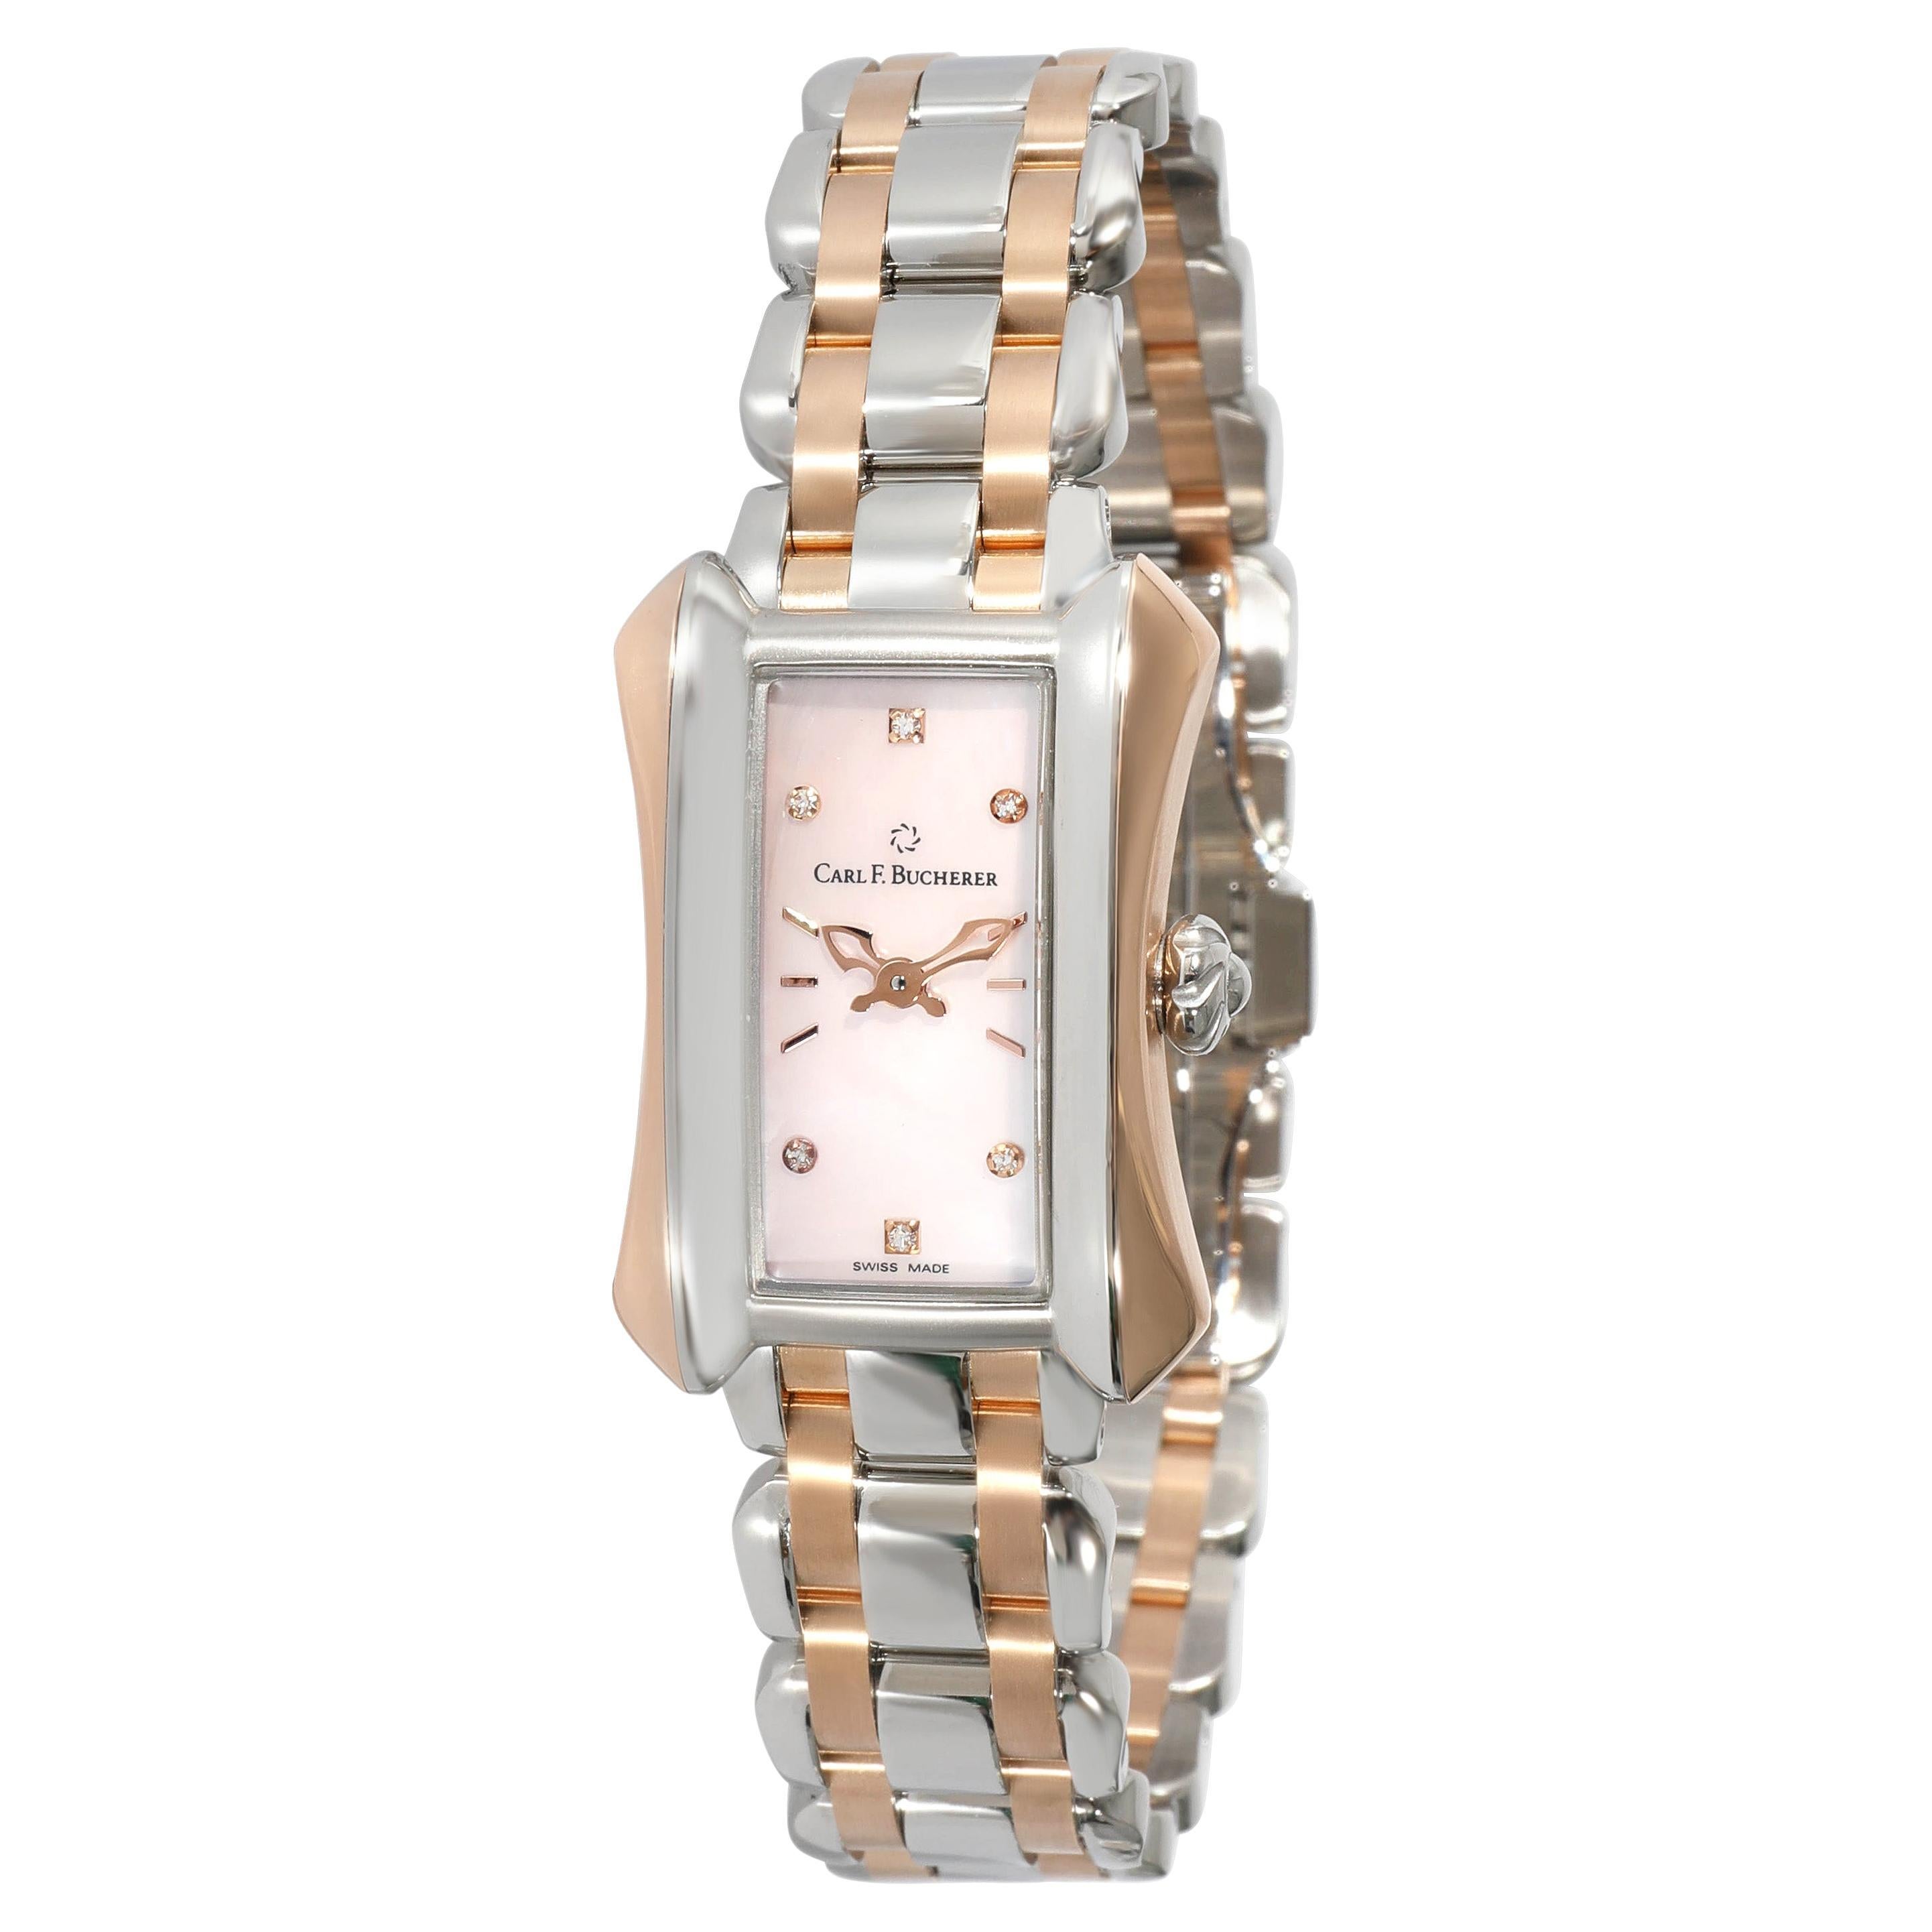 Bucherer Alacria Princess 00.10703.07.77.21 Women's Watch in 18kt Stainless Stee For Sale